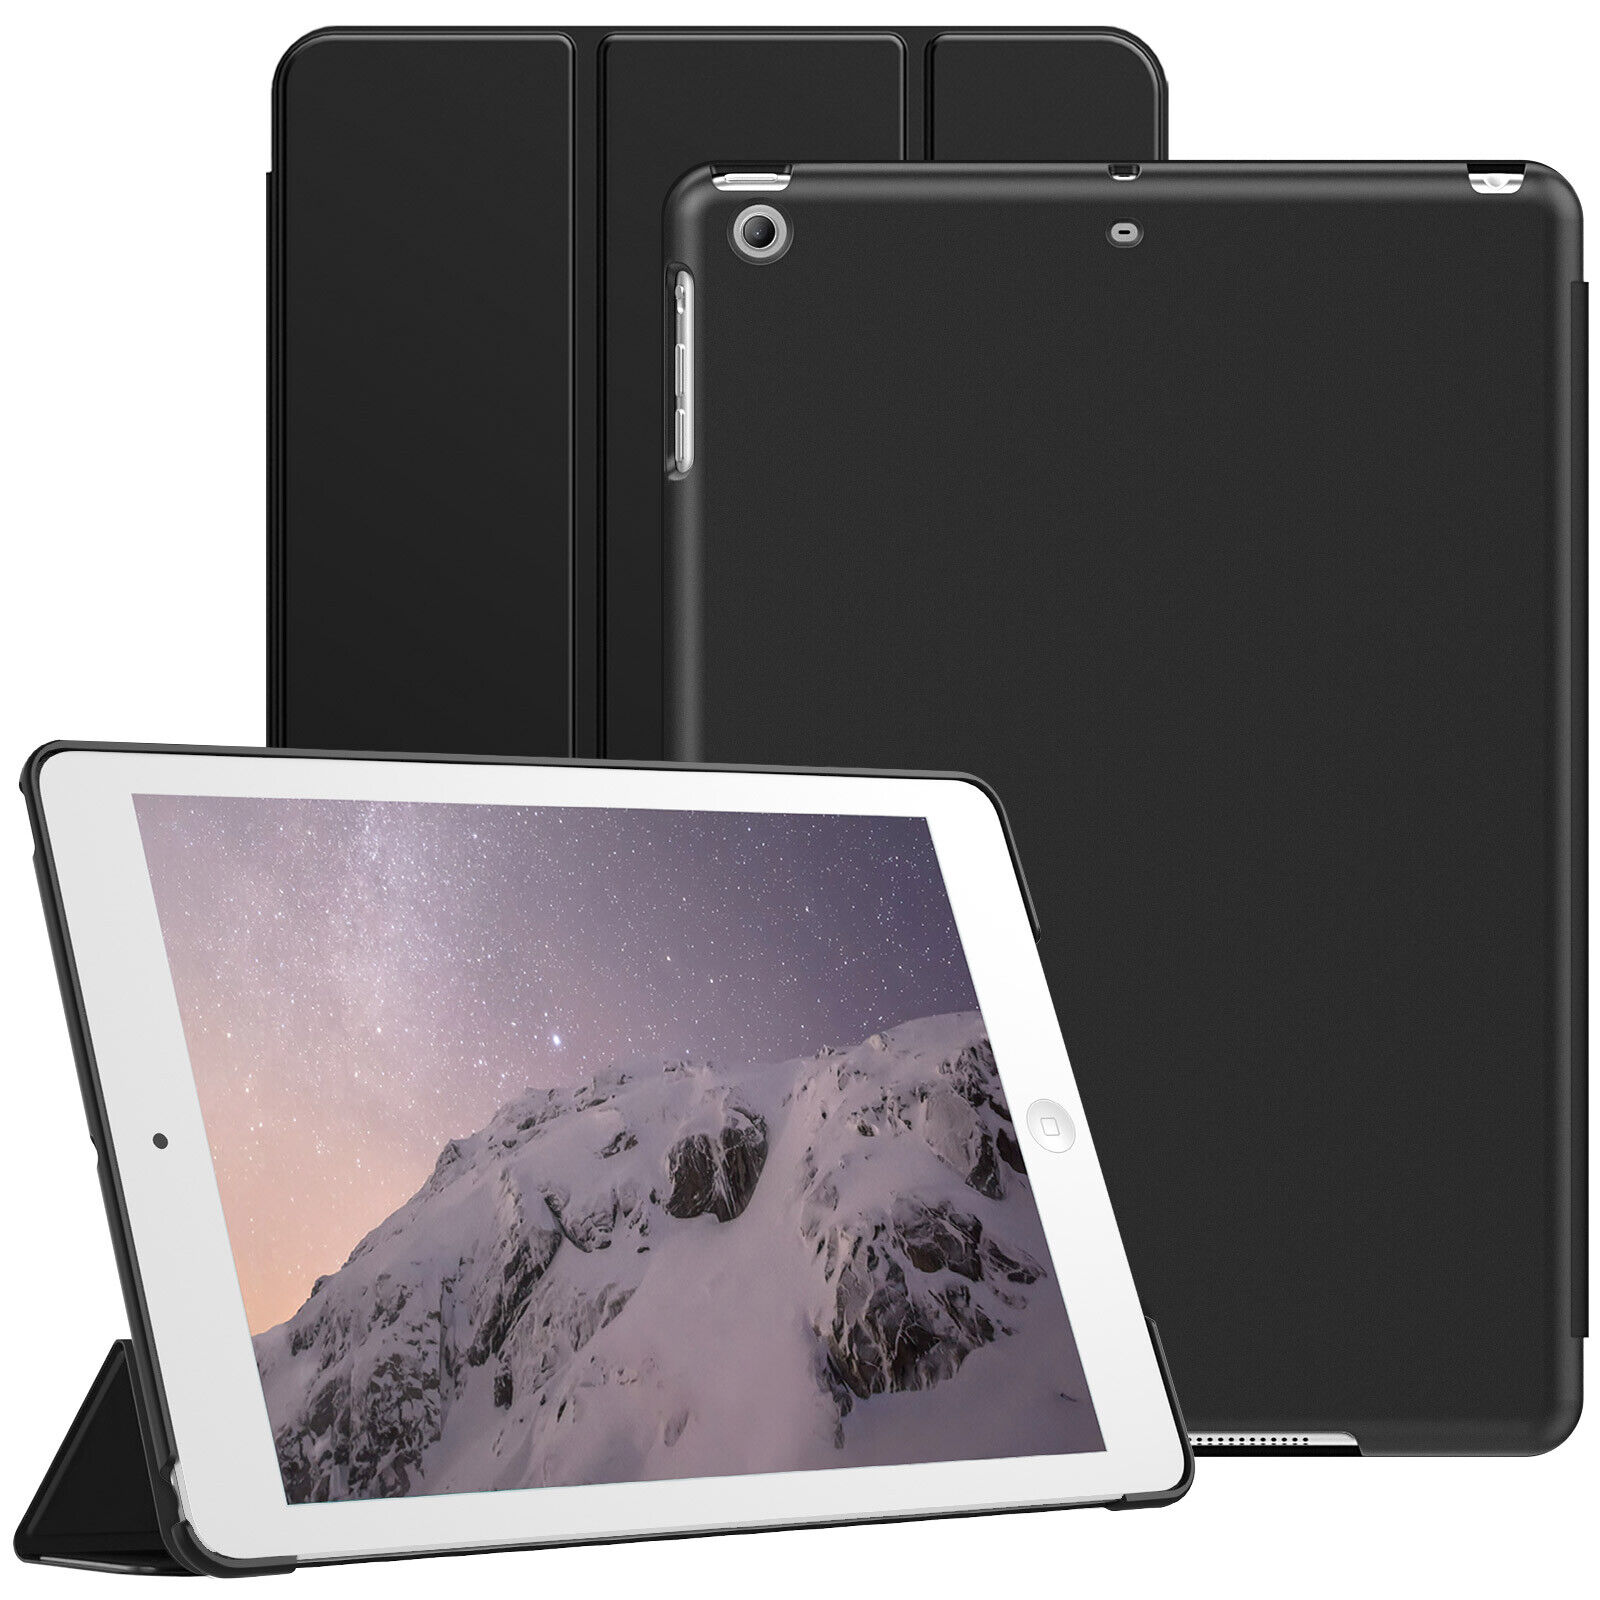 JETech Case for iPad Air 1st Edition (NOT for iPad Air 2/3/4) 9.7 Inch Cover